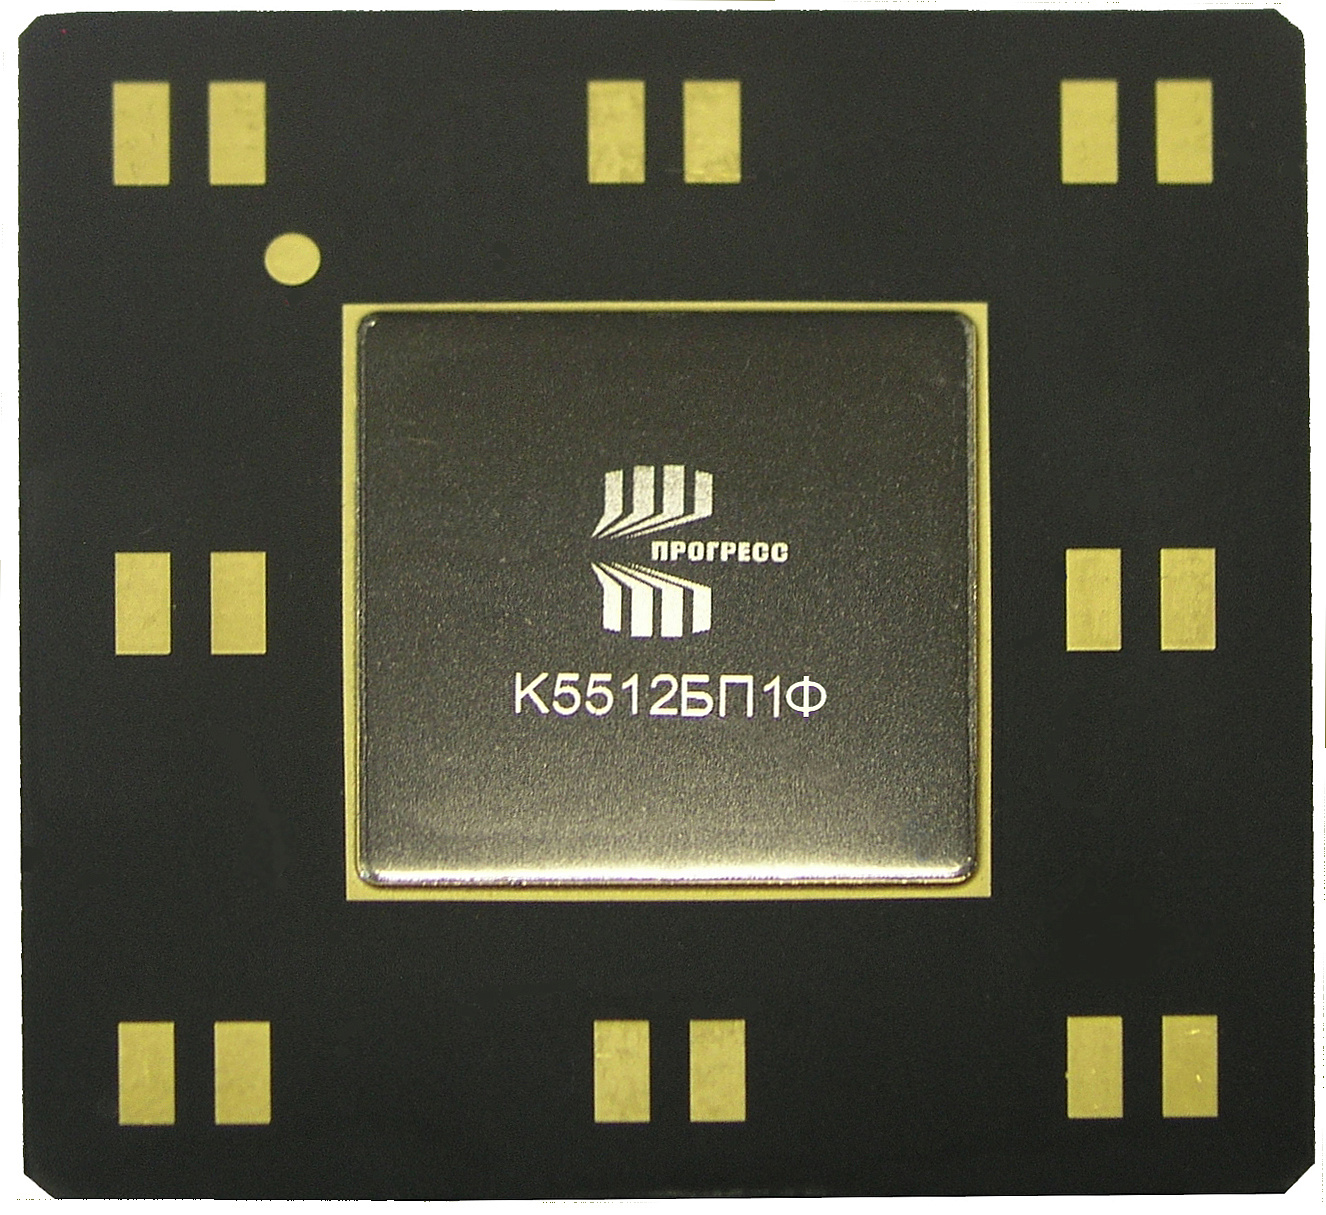 Semi-order VLSI СНК 5512БП1Ф with built-in MP core